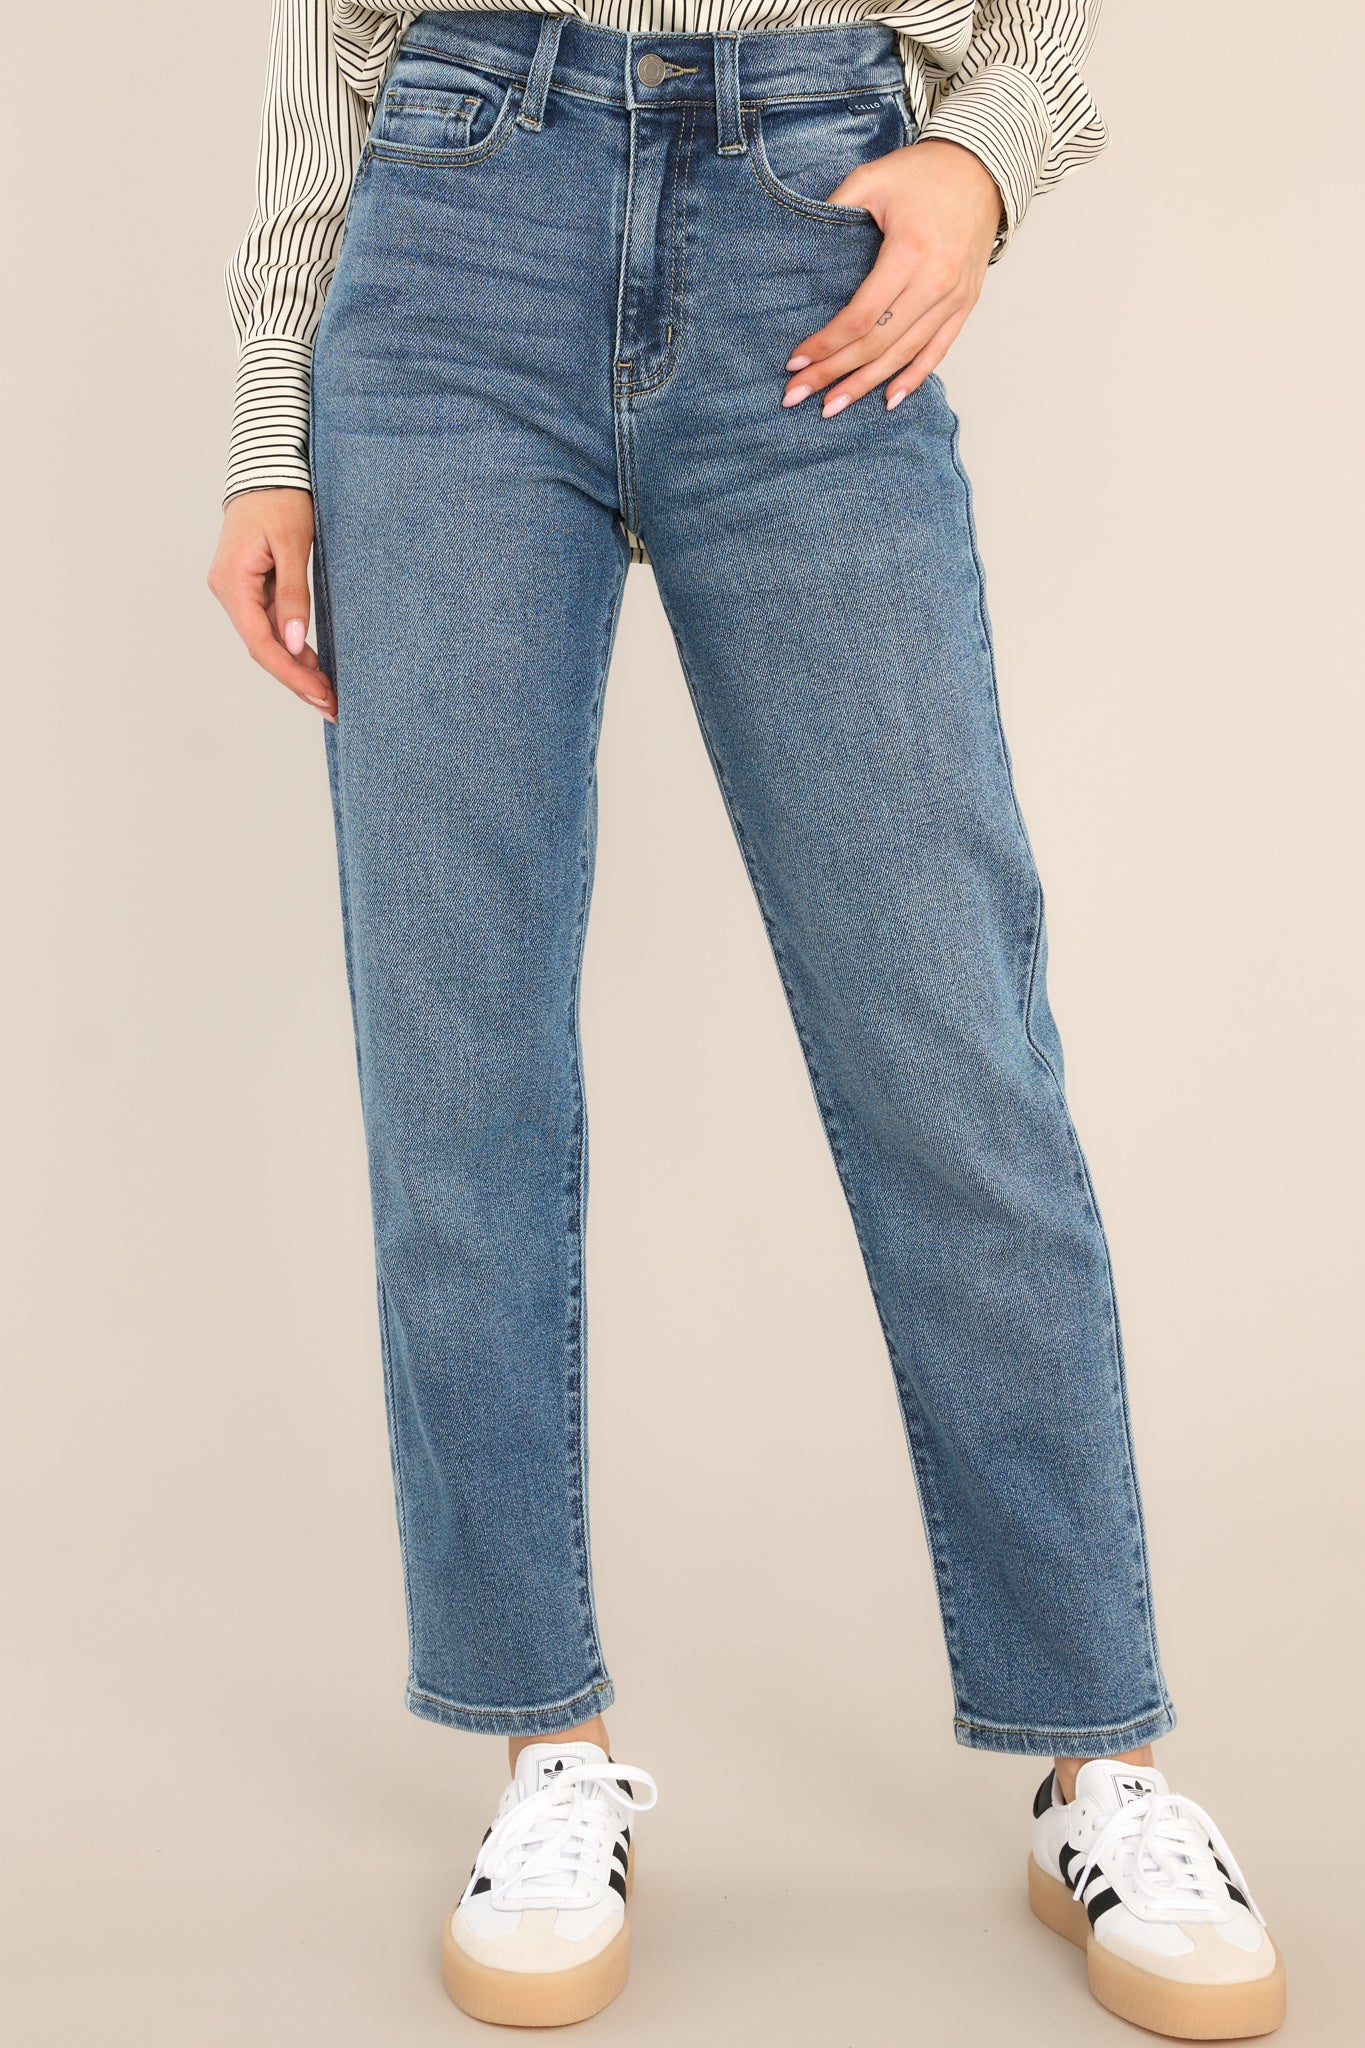 These medium wash jeans feature a zipper and button closure, belt loops, 5 functional pockets, and a straight leg design.